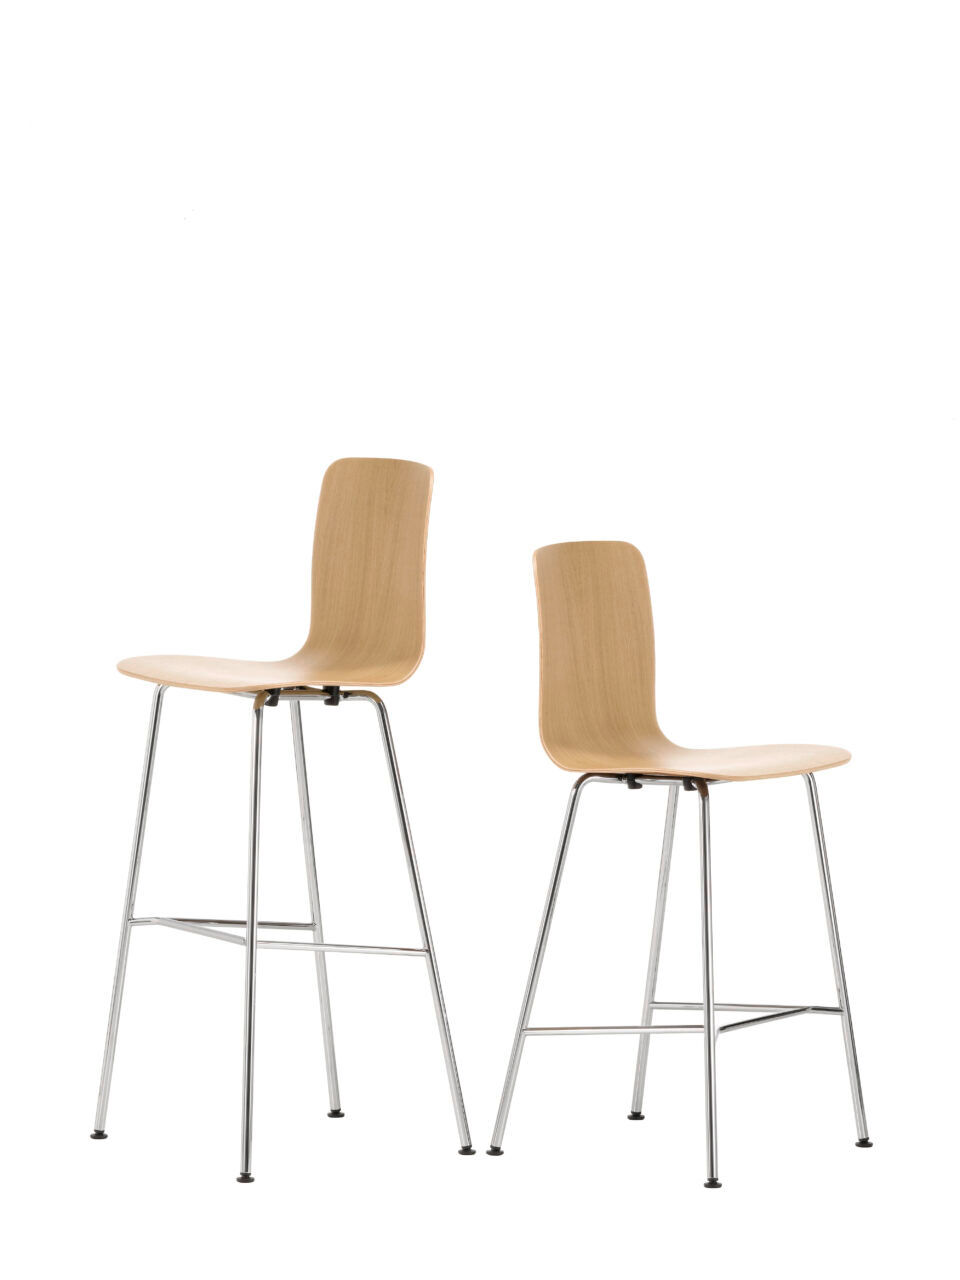 Hal is a design stool produced by Vitra and offered by Peverelli